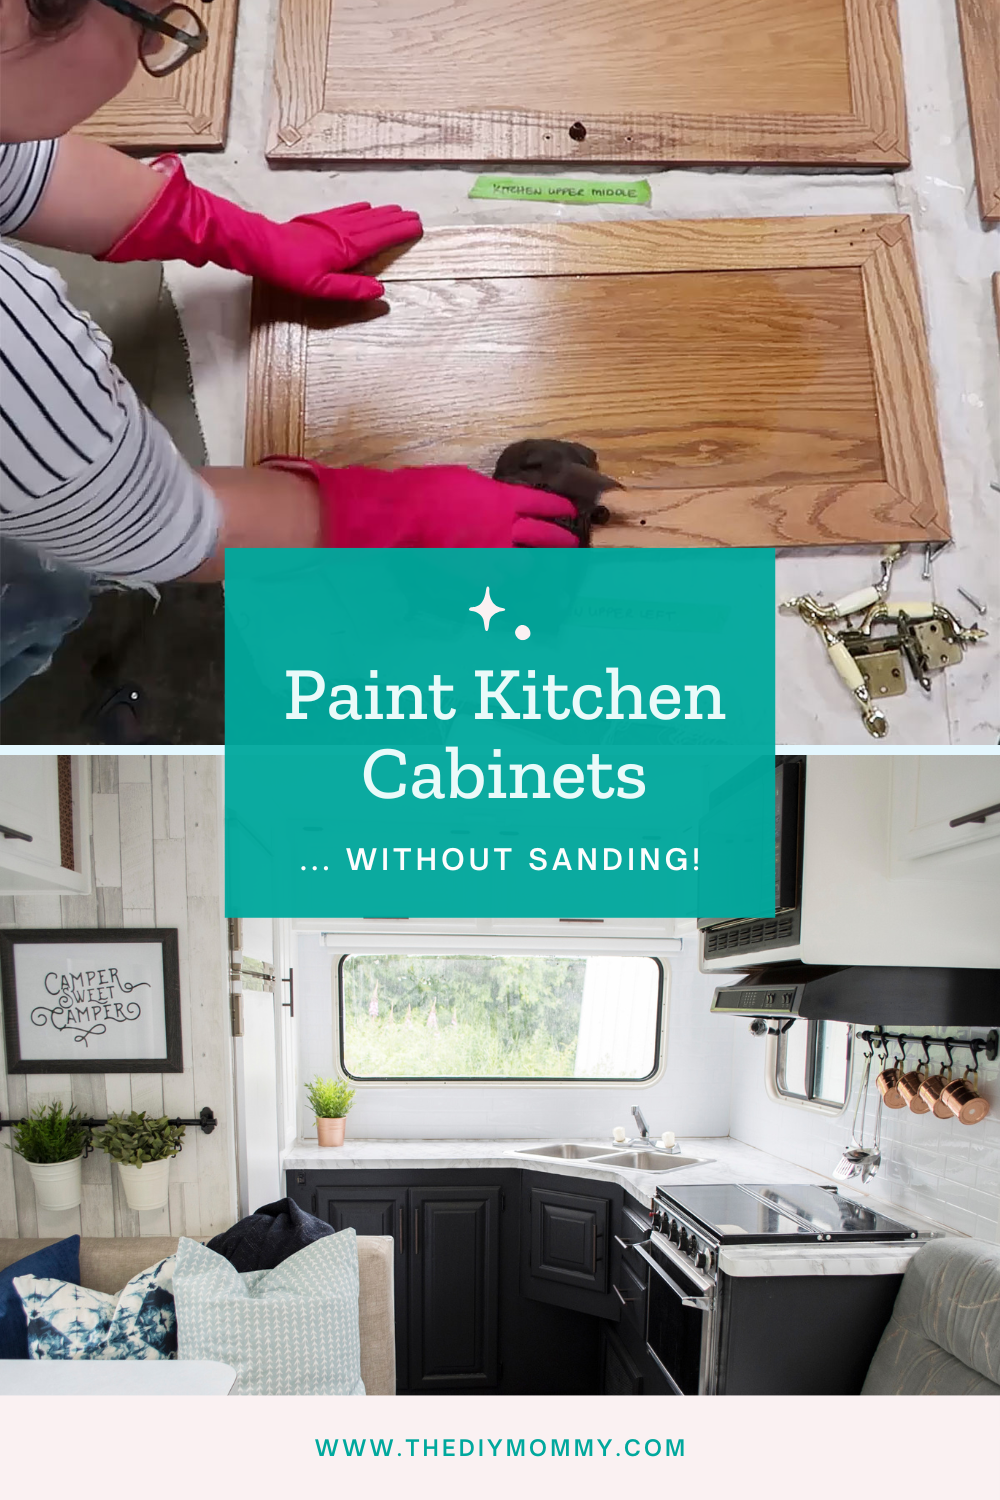 How to Paint Kitchen Cabinets Without Sanding (Easy!)